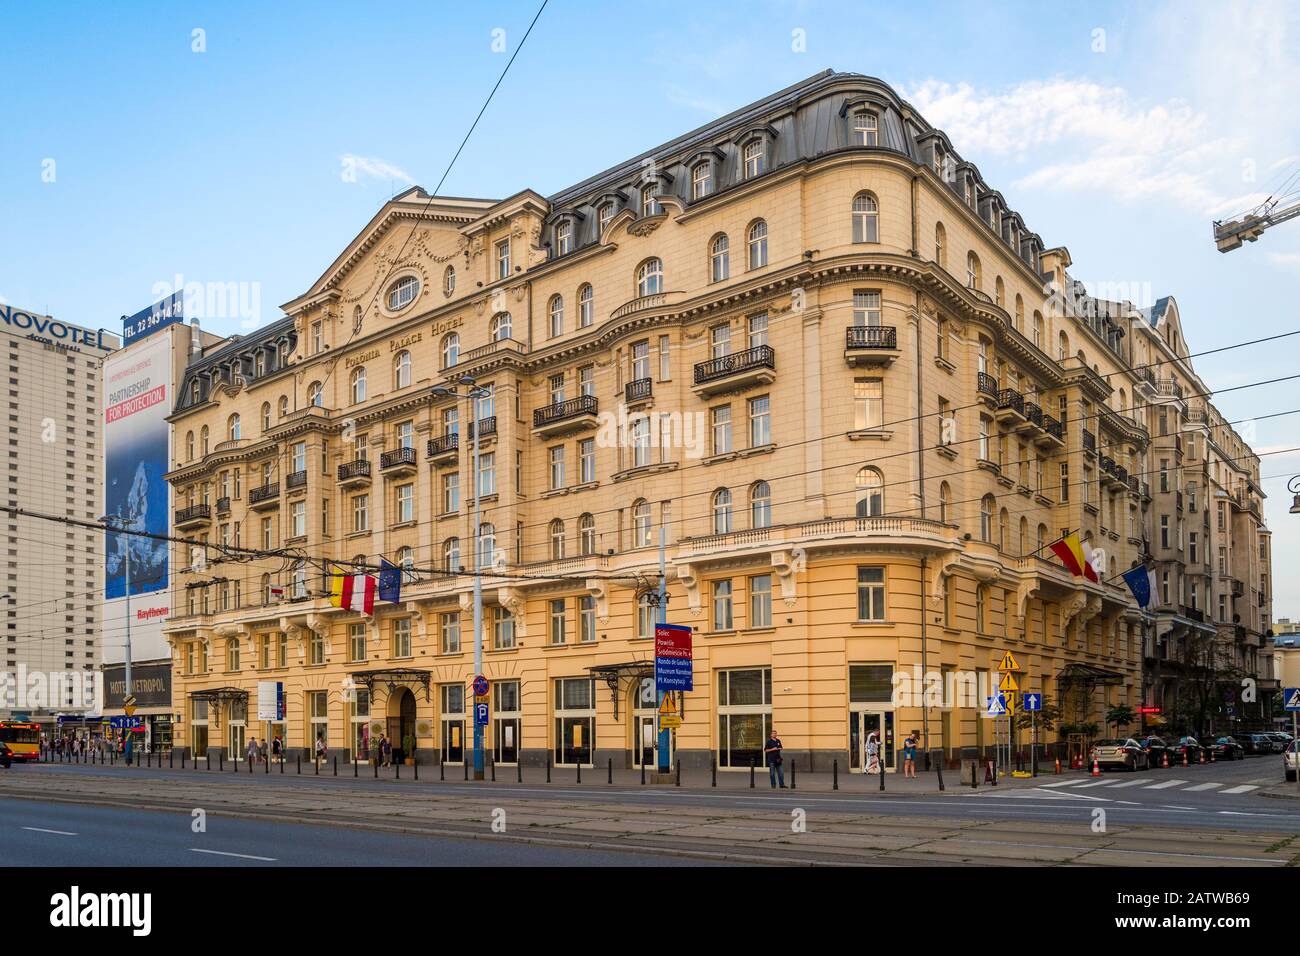 The Polonia Palace Hotel (1913) is a historic building in central Warsaw, Poland. Stock Photo